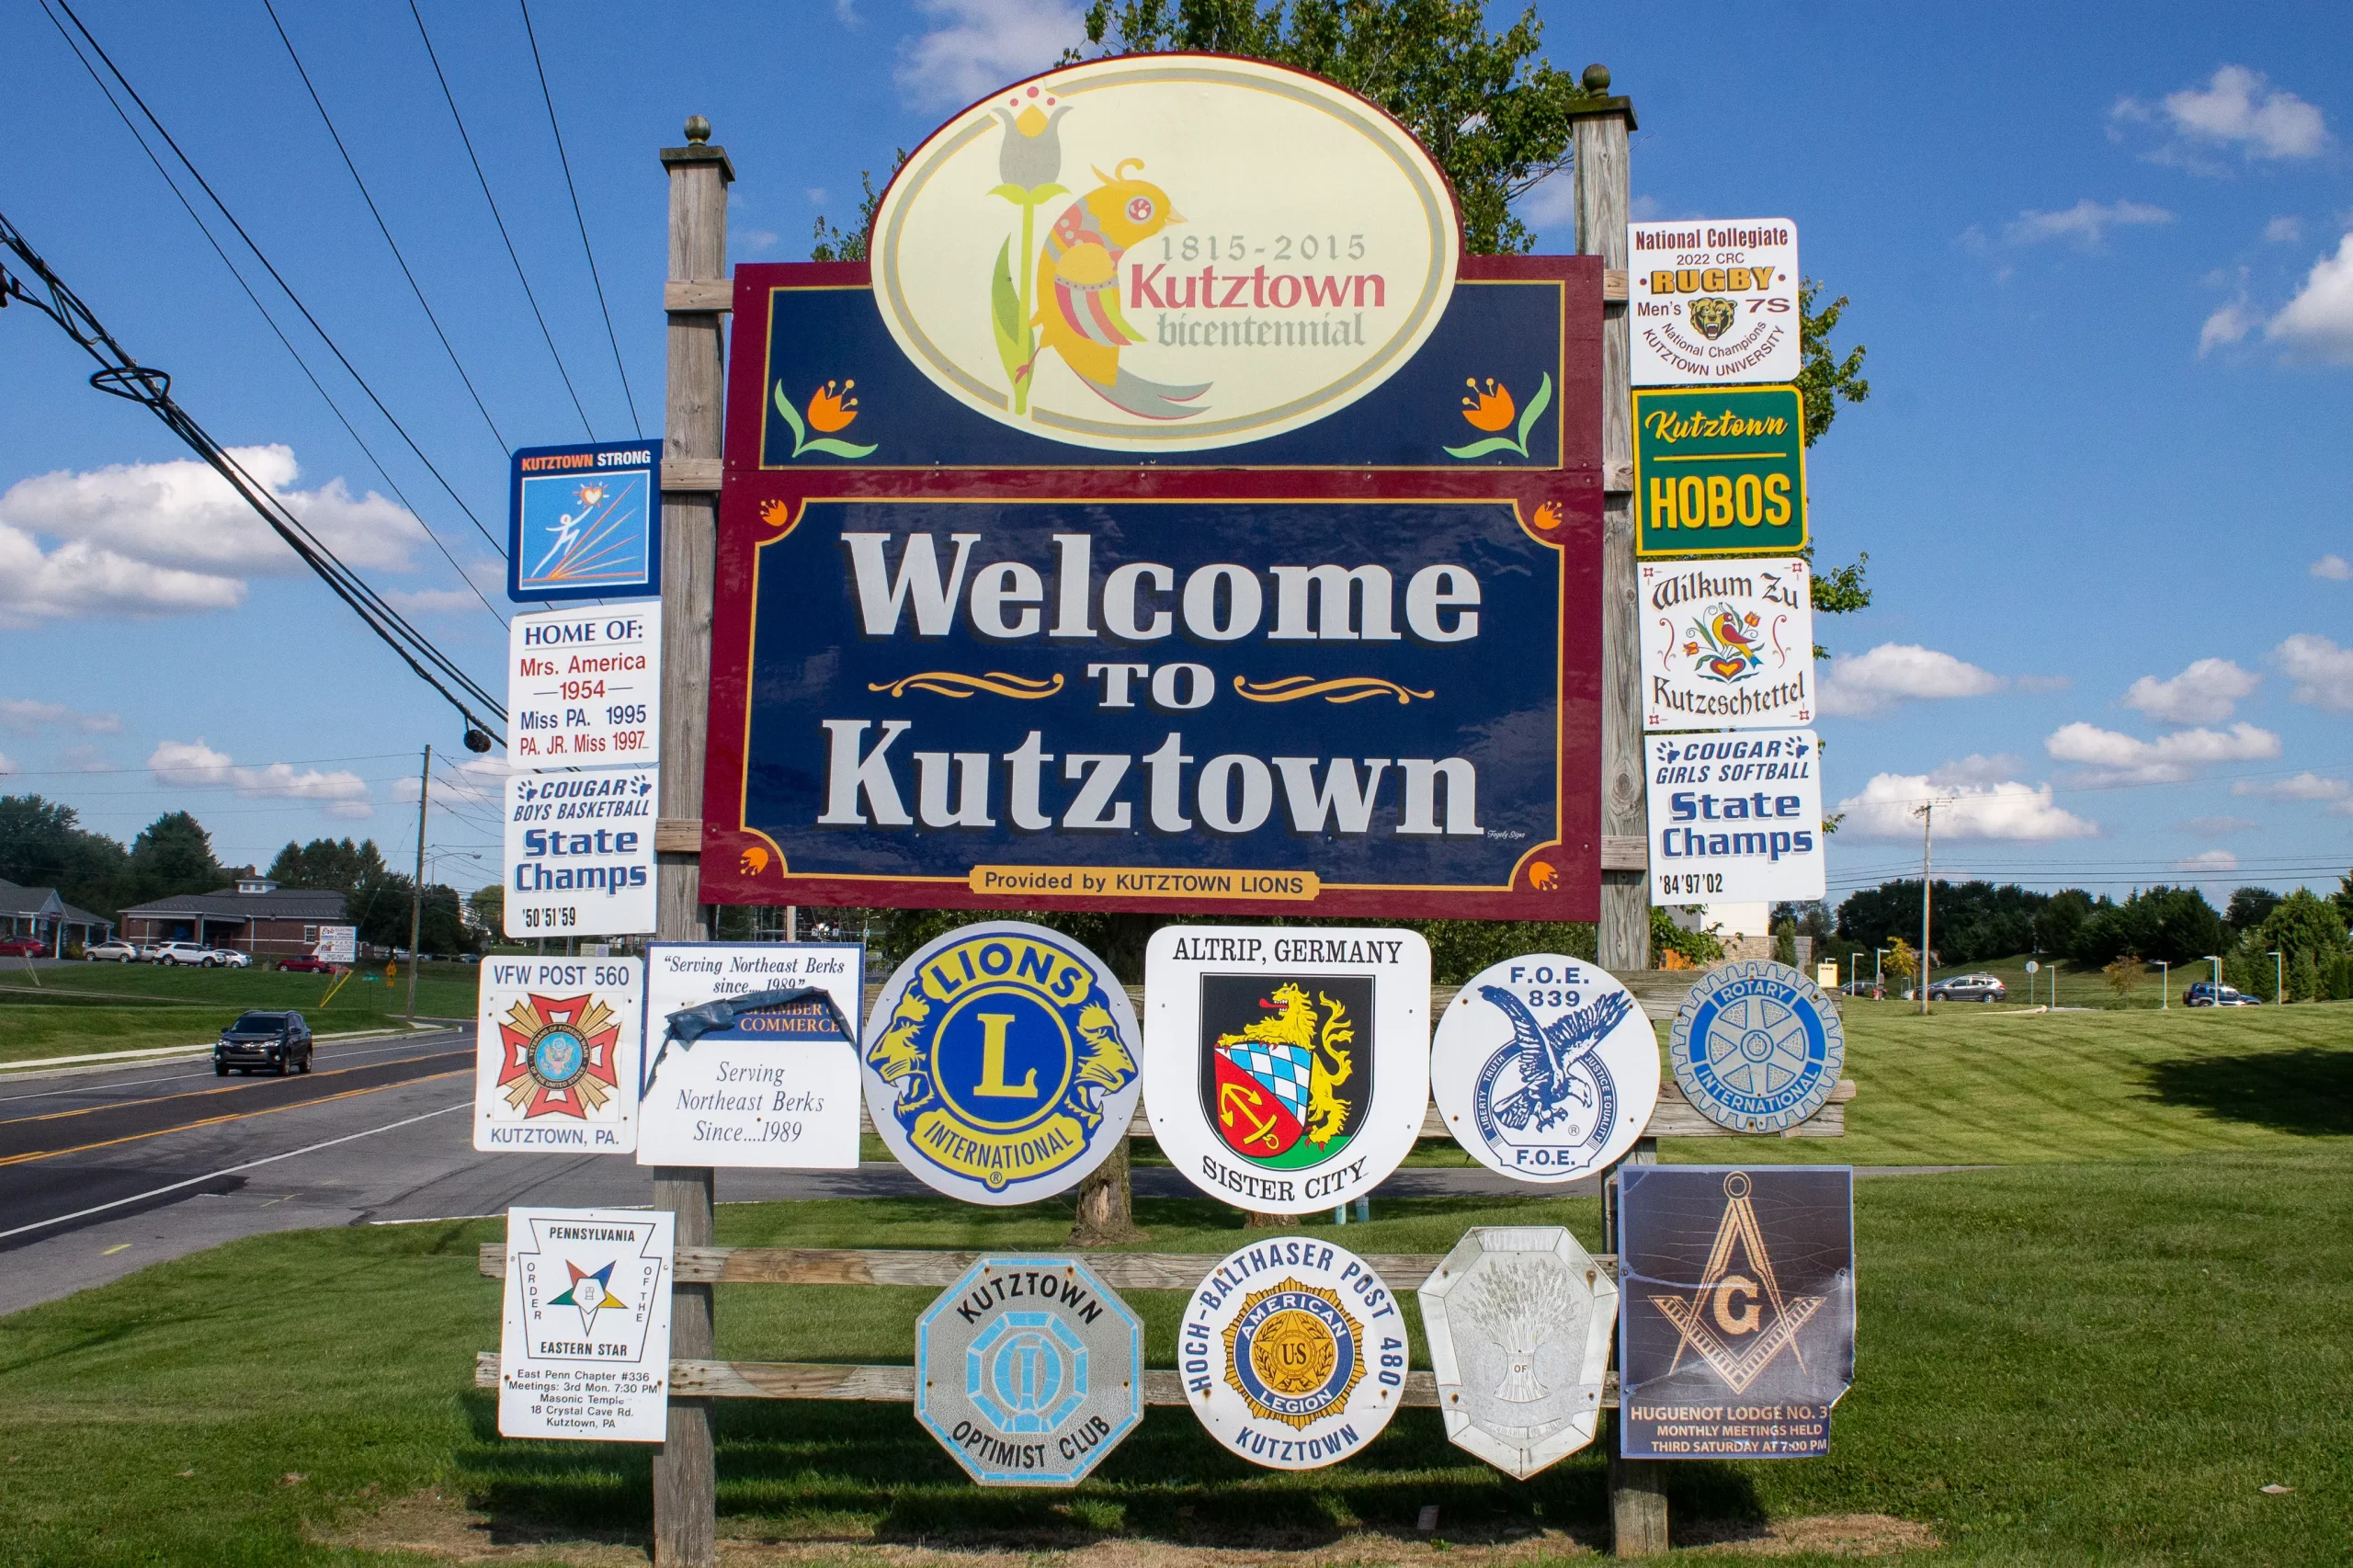 A photo of the Welcome to Kutzown sign, surrounded by smaller signs showcasing different clubs and championships from the area.